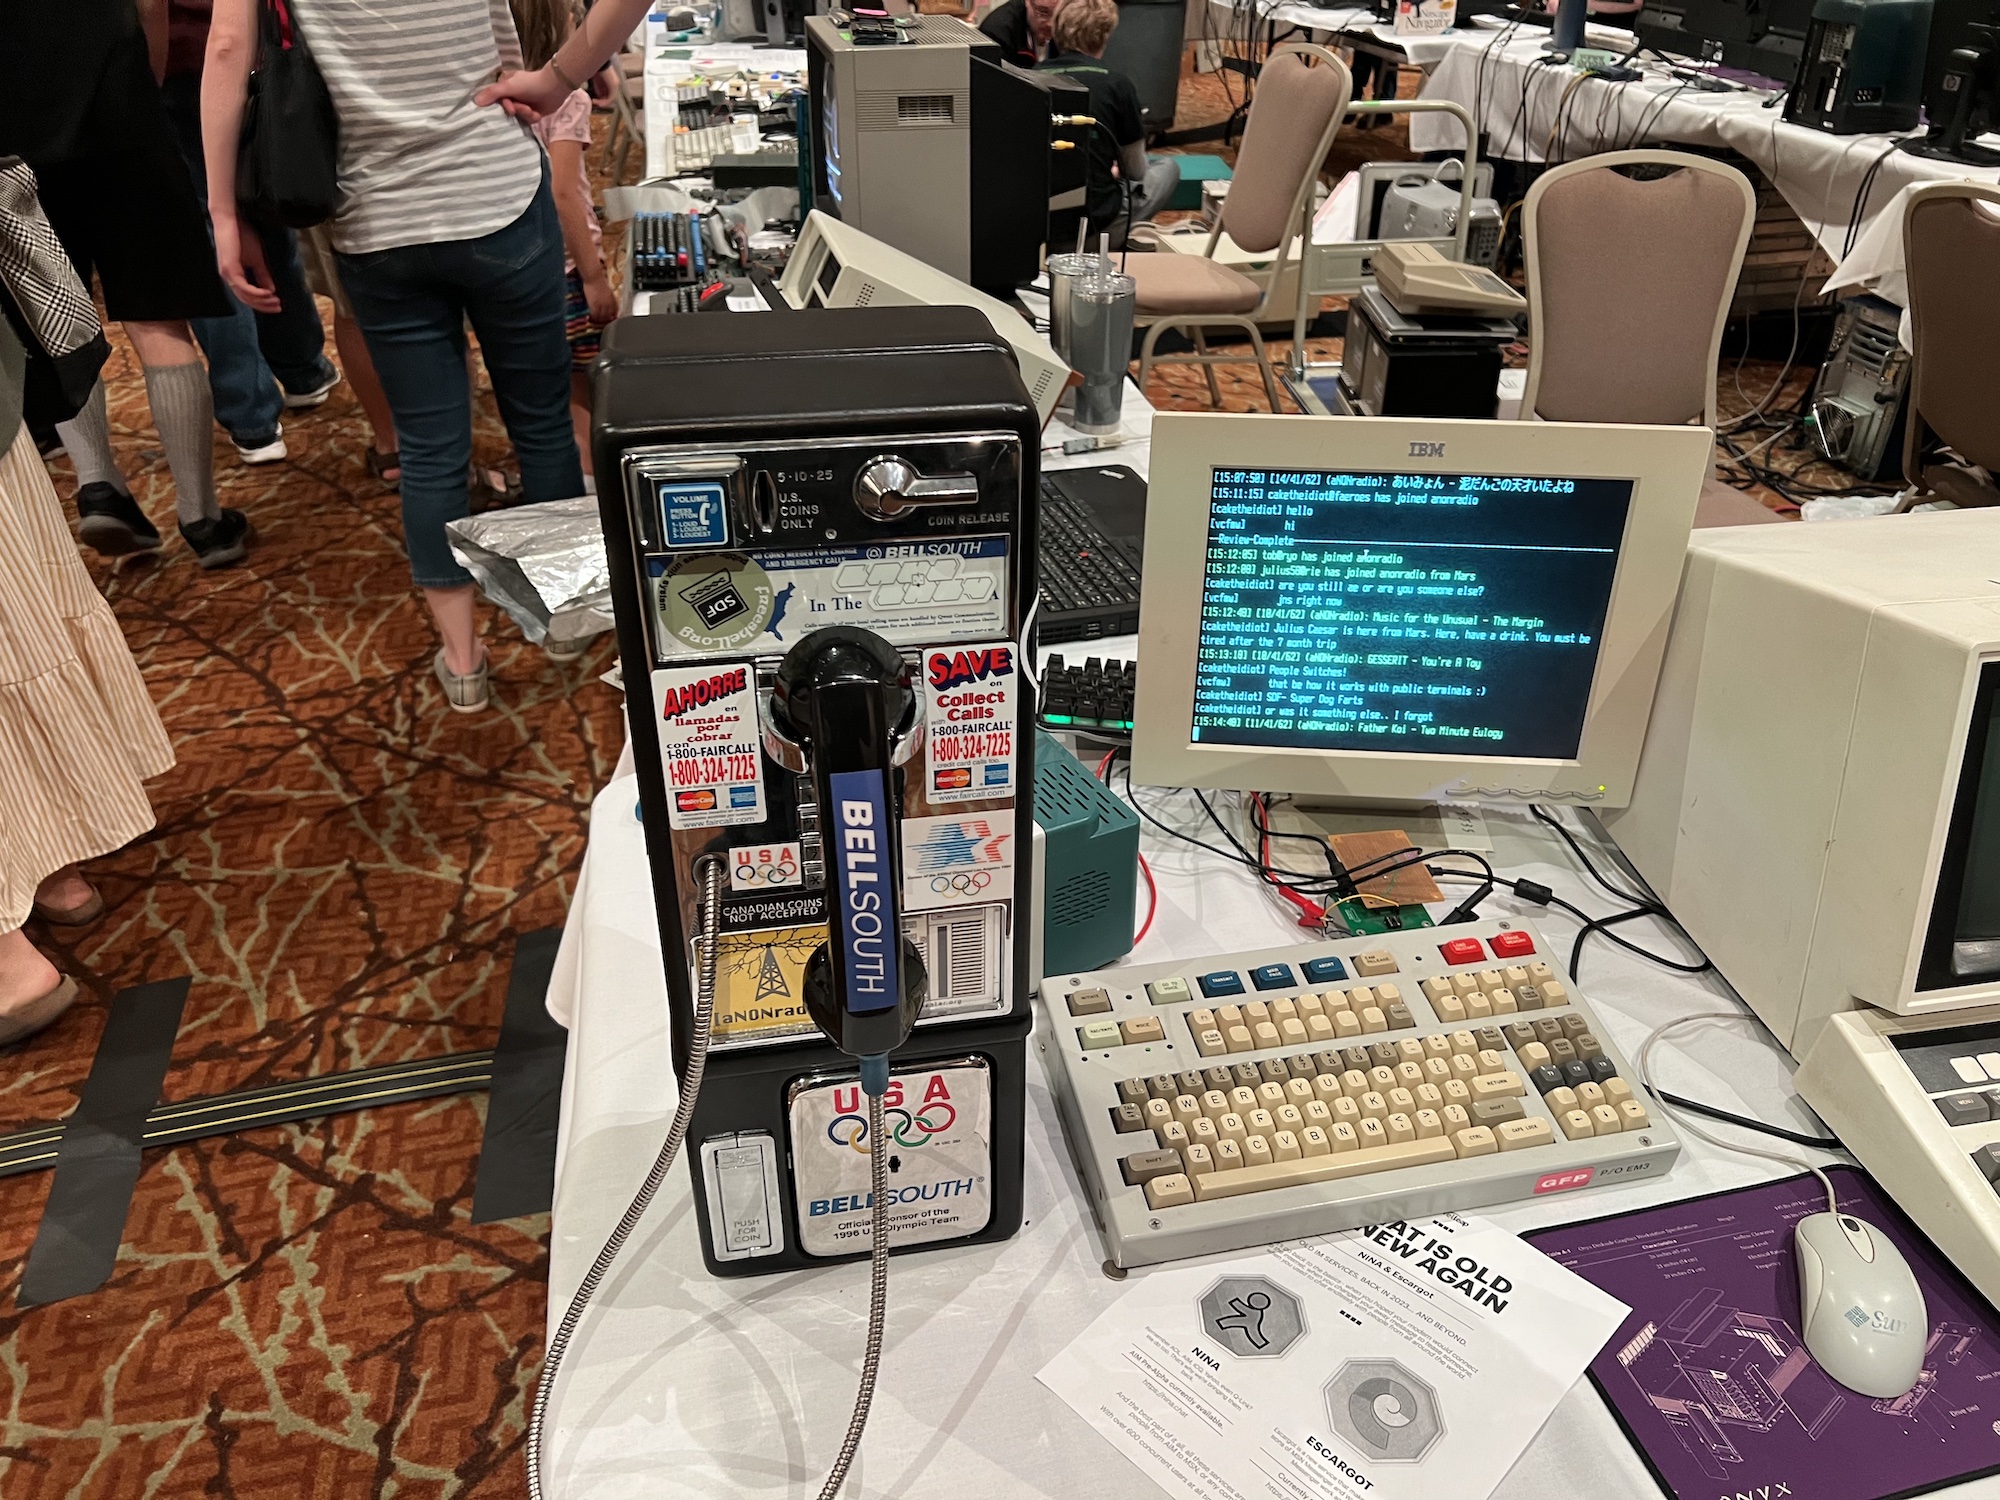 Payphone and computer used to hack it